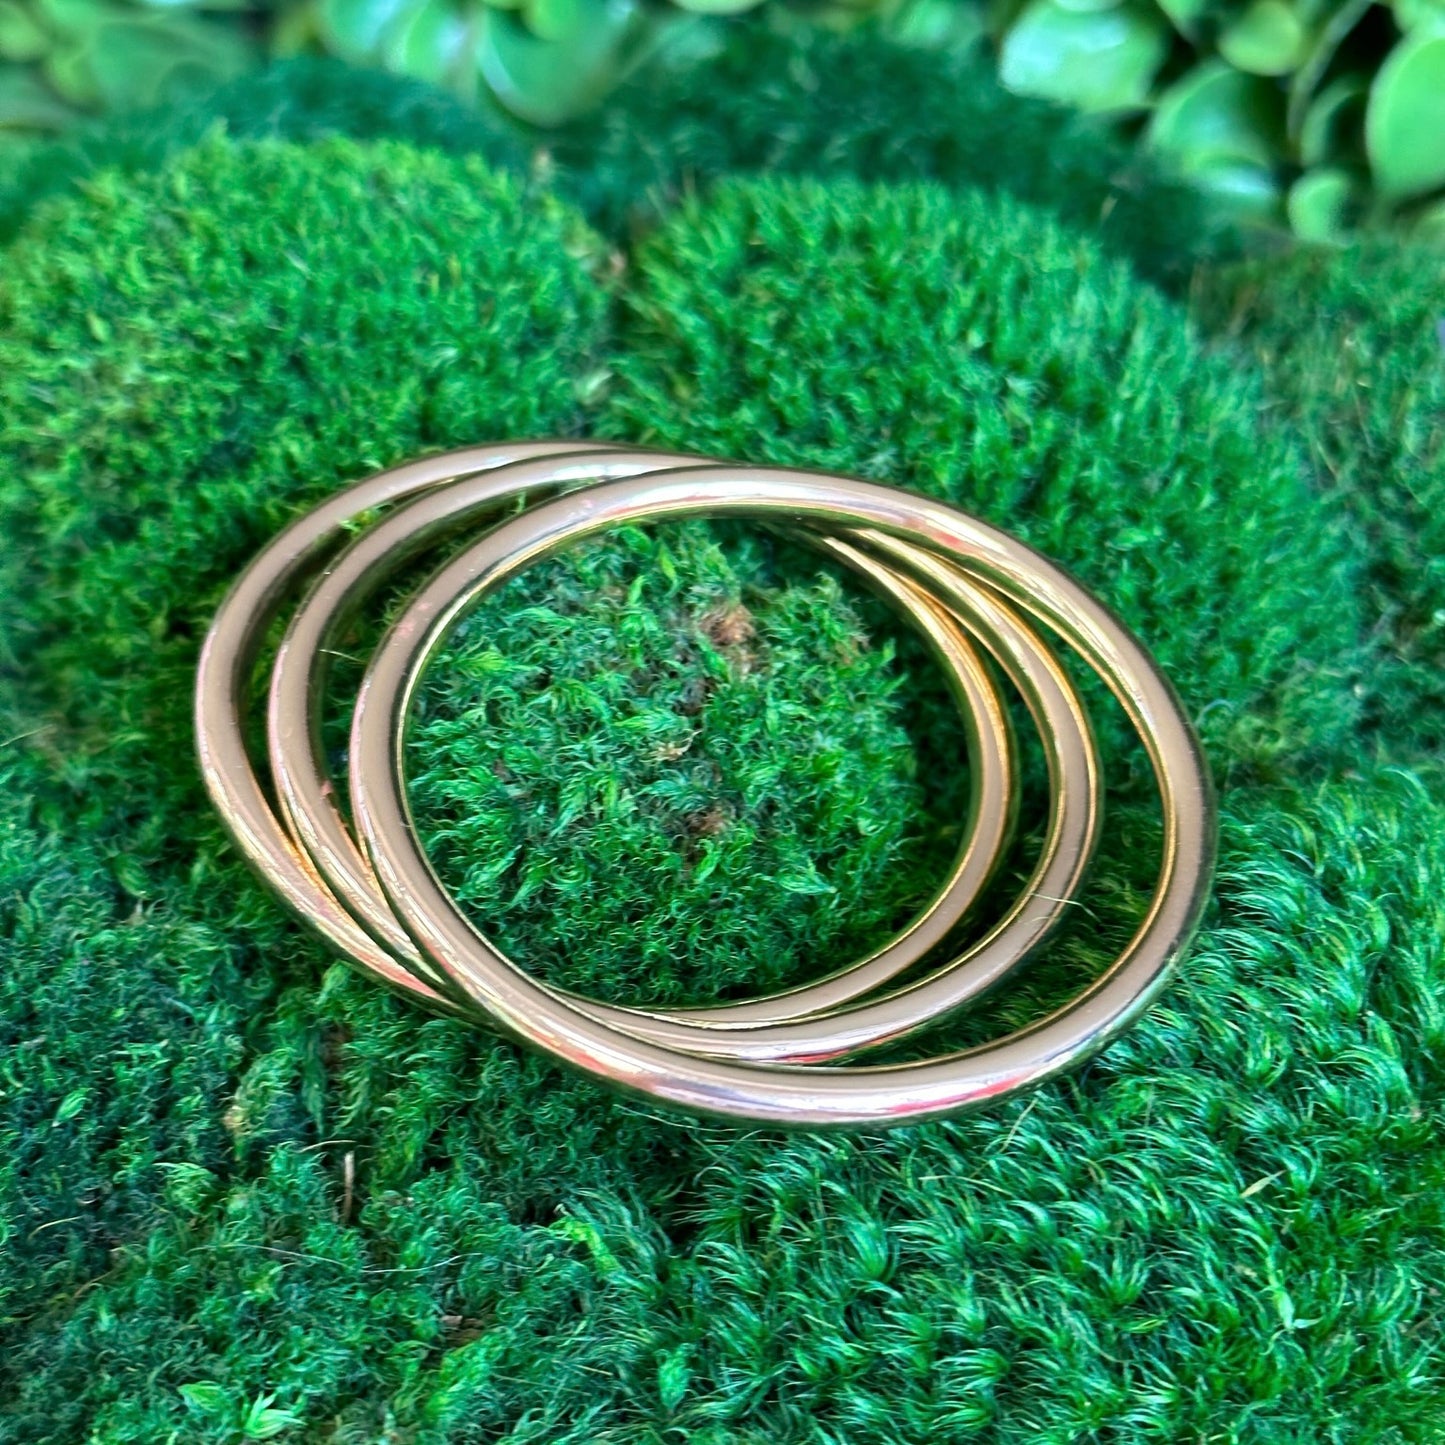 Simple Gold Bangles